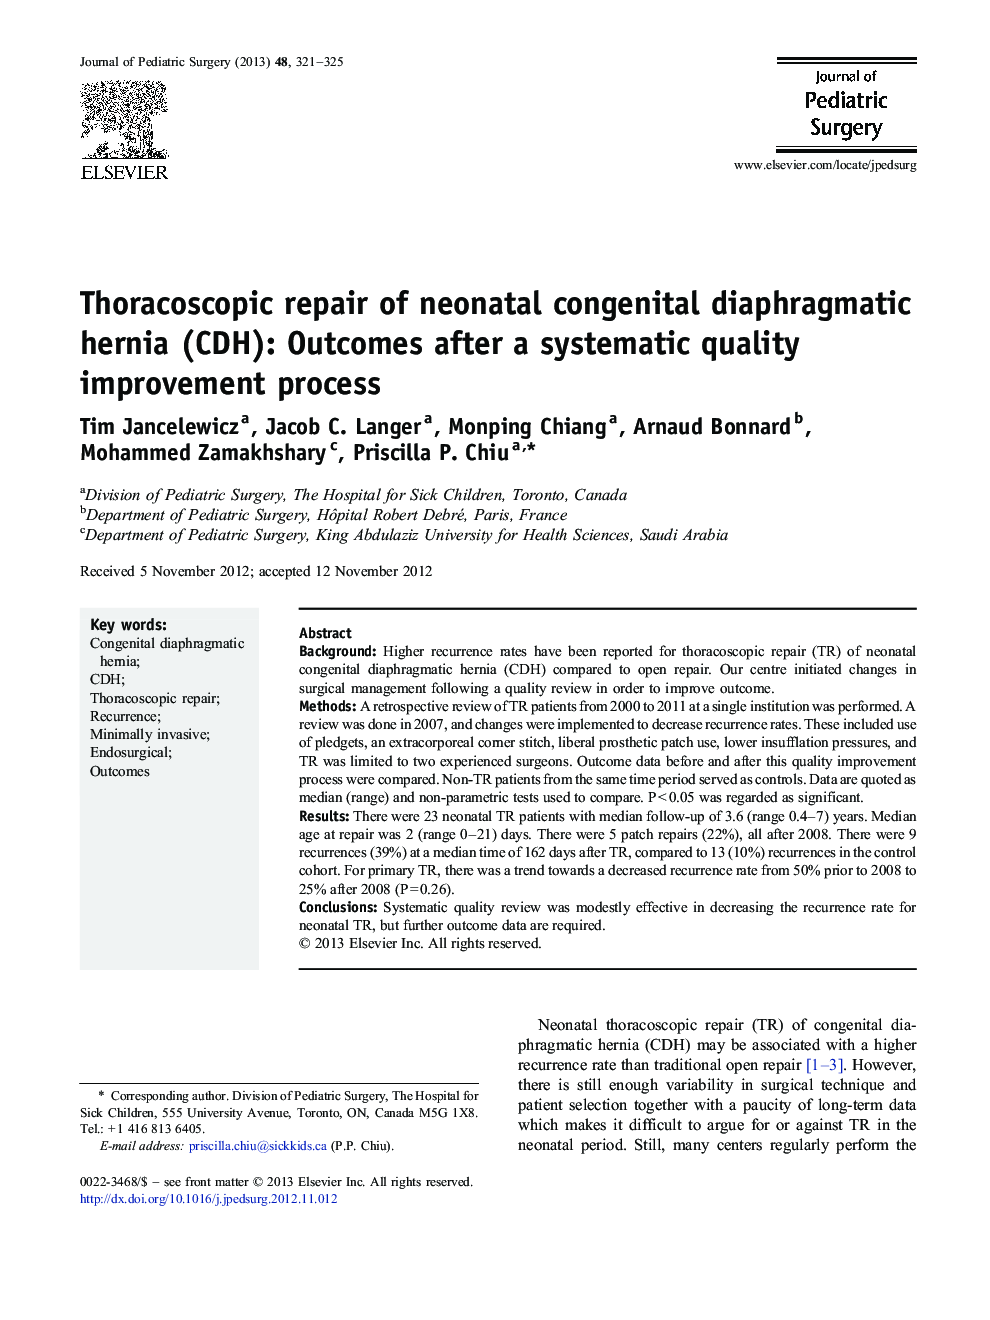 Thoracoscopic repair of neonatal congenital diaphragmatic hernia (CDH): Outcomes after a systematic quality improvement process